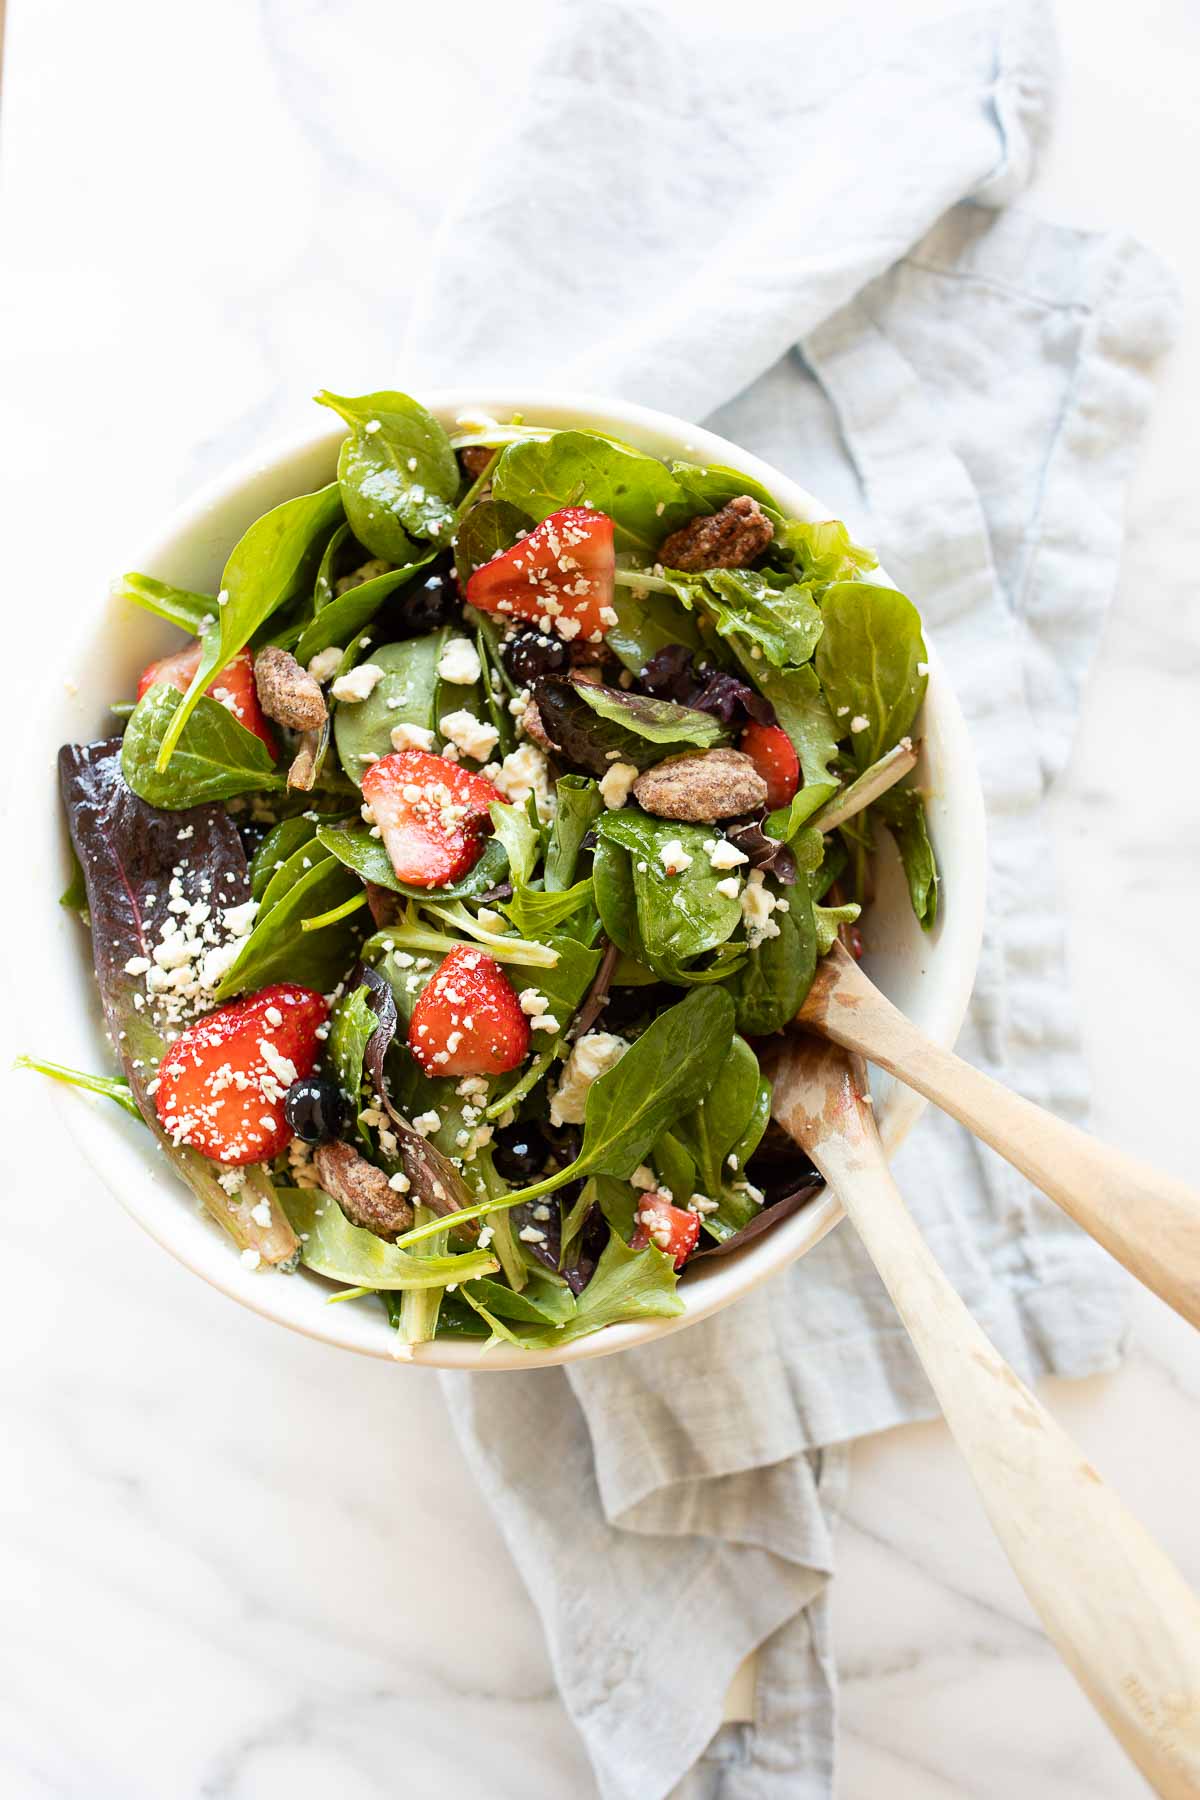 A bowl of spinach salad with strawberries and walnuts, perfect for Easter side dishes.